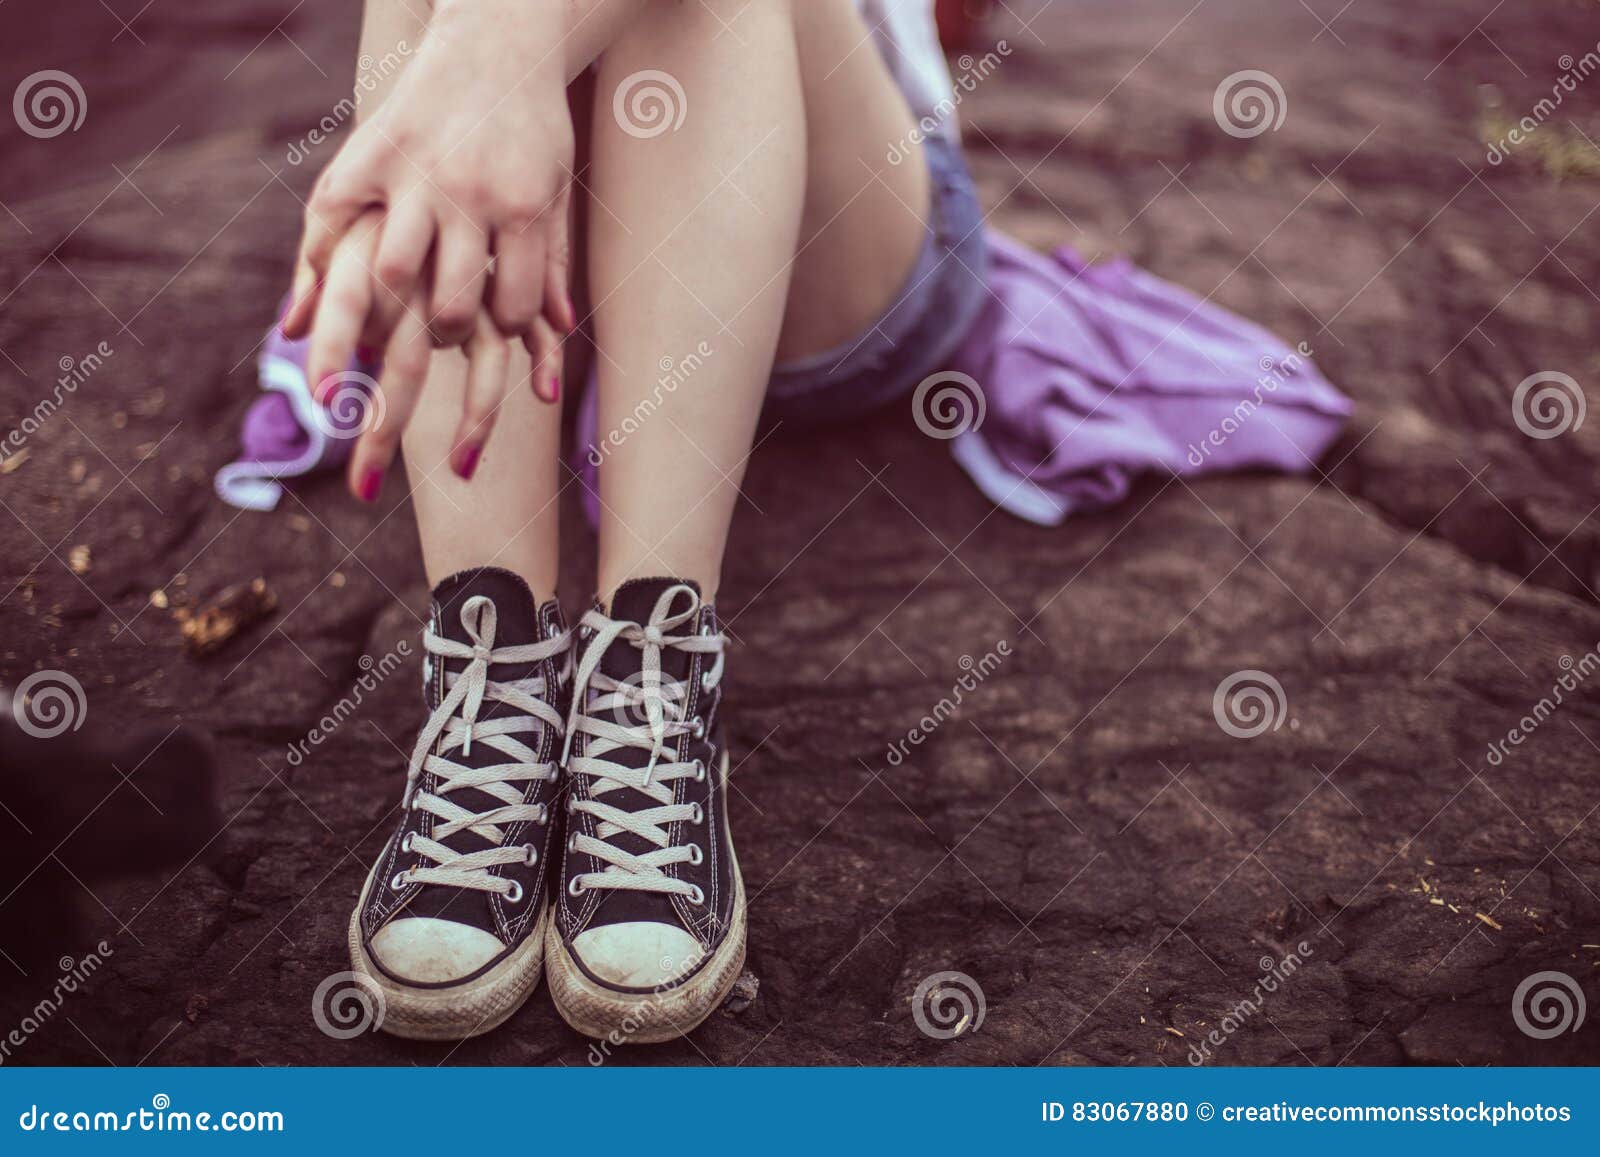 Teenage Girl Sitting On A Rock Picture. Image: 83067880